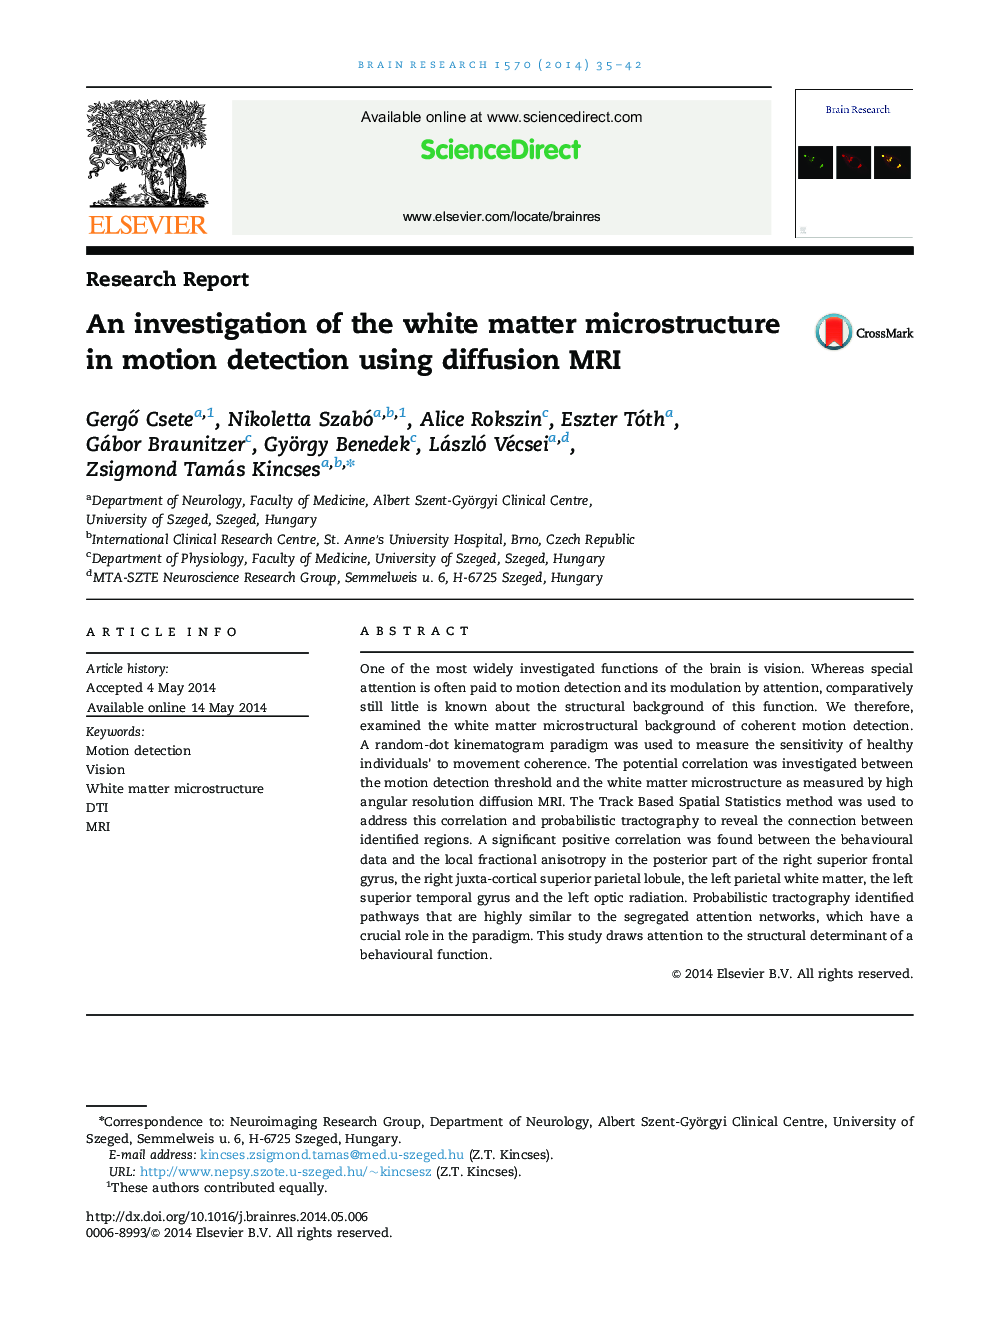 Research ReportAn investigation of the white matter microstructure in motion detection using diffusion MRI